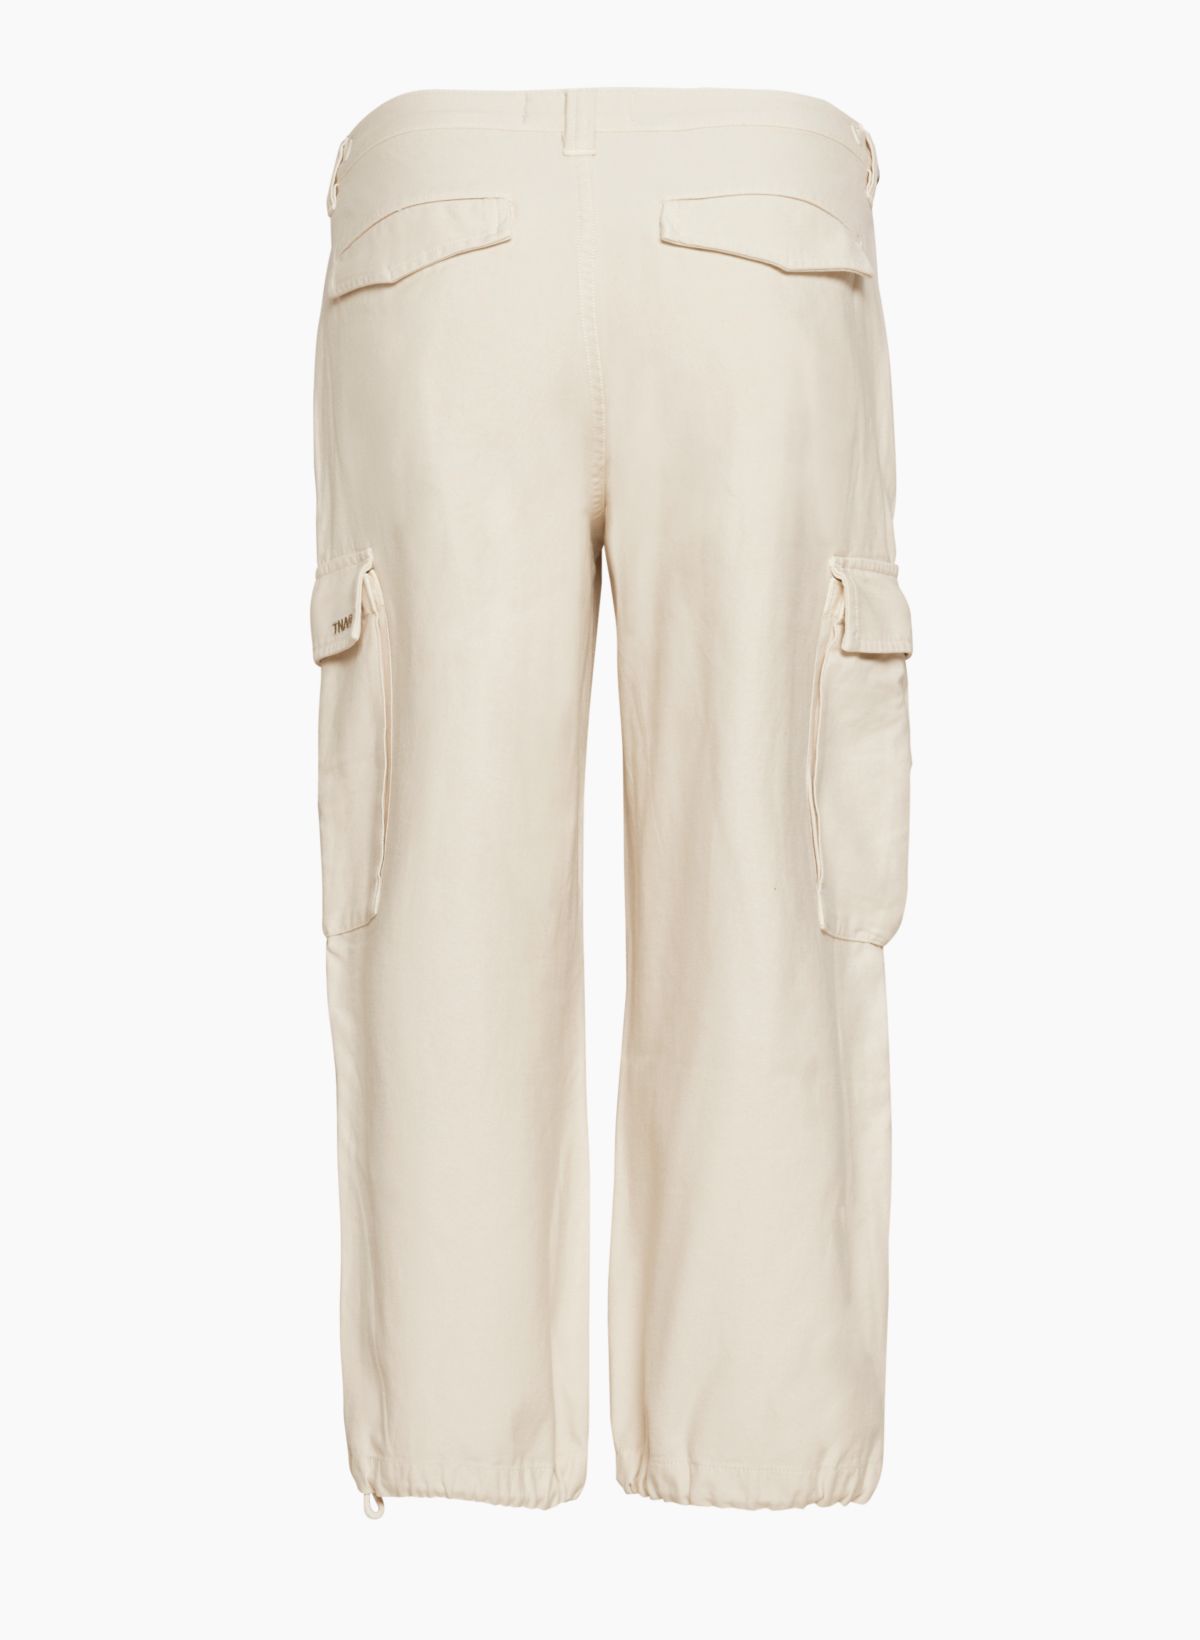 Louis Vuitton Embroidered Cargo Pants